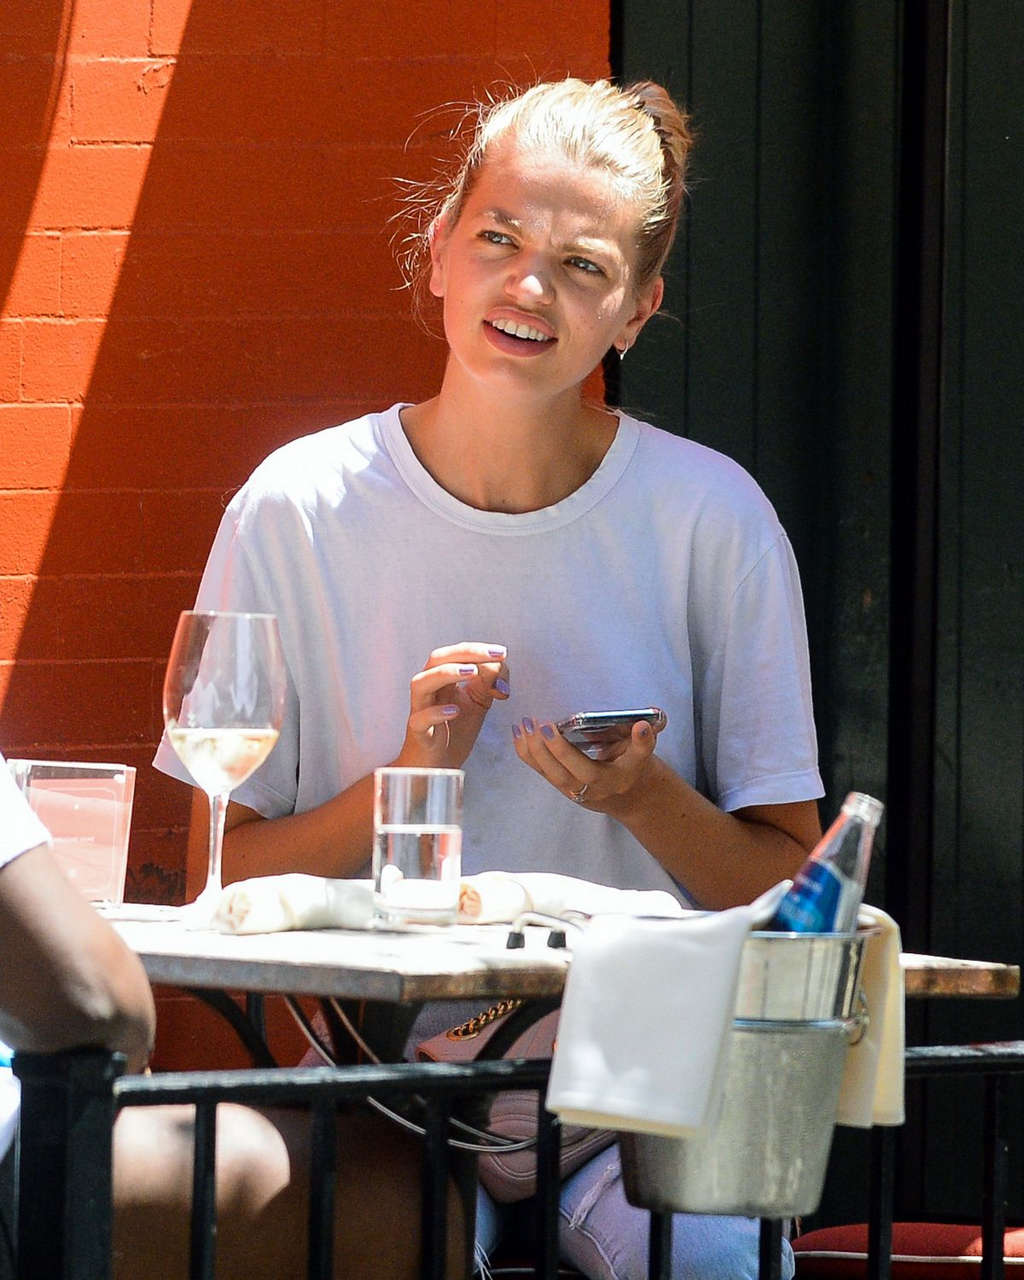 Daphne Groeneveld Showing Engagement Ring Out West Village